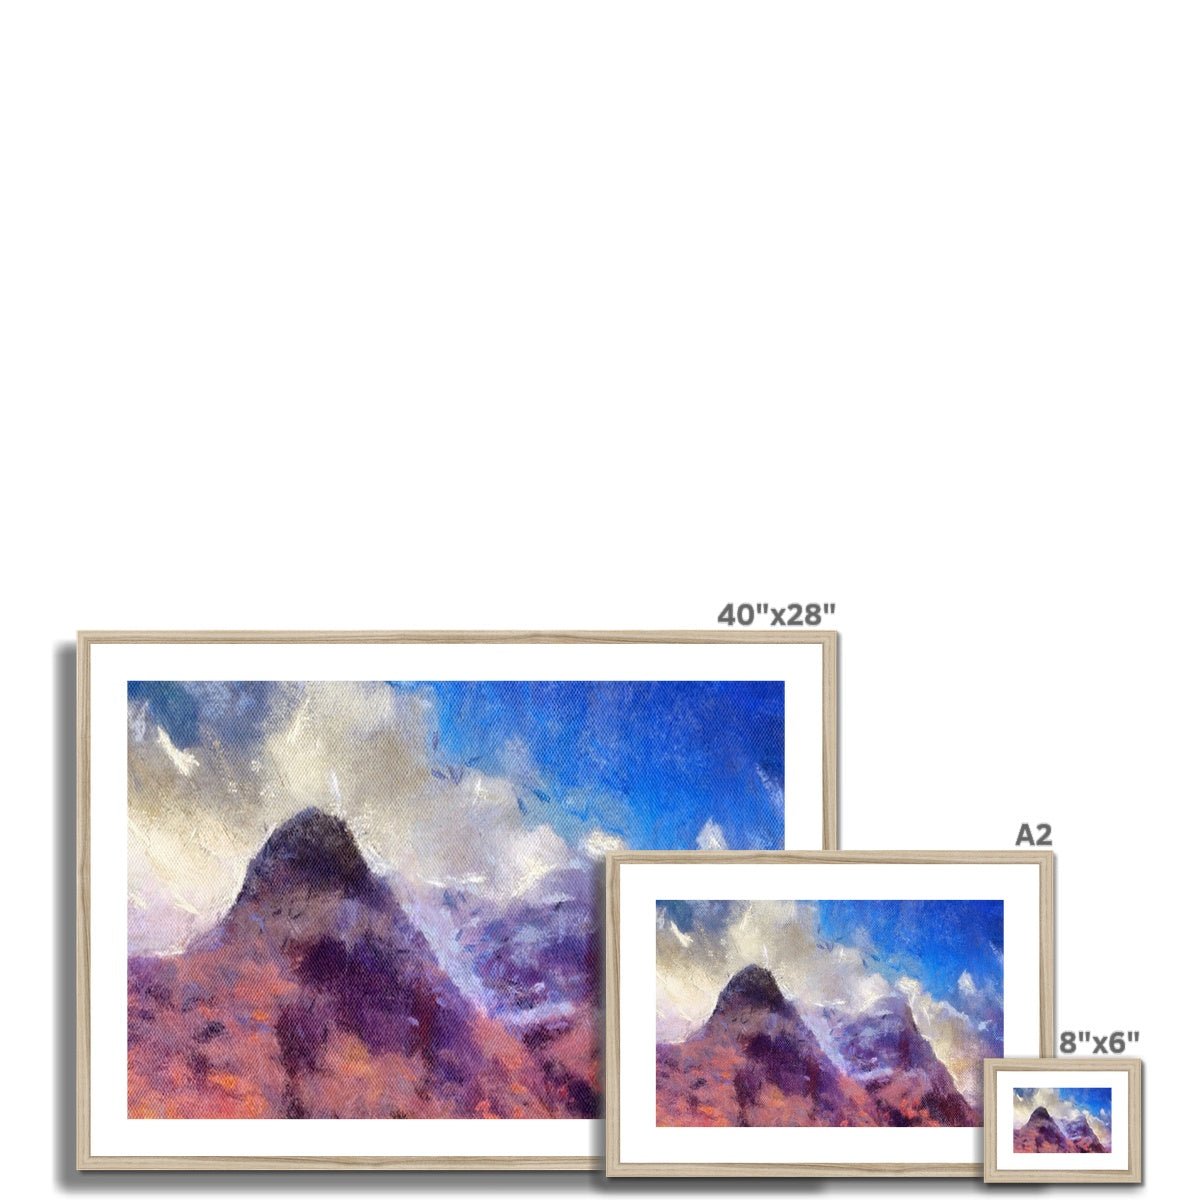 Glencoe Painting | Framed & Mounted Prints From Scotland-Framed & Mounted Prints-Glencoe Art Gallery-Paintings, Prints, Homeware, Art Gifts From Scotland By Scottish Artist Kevin Hunter